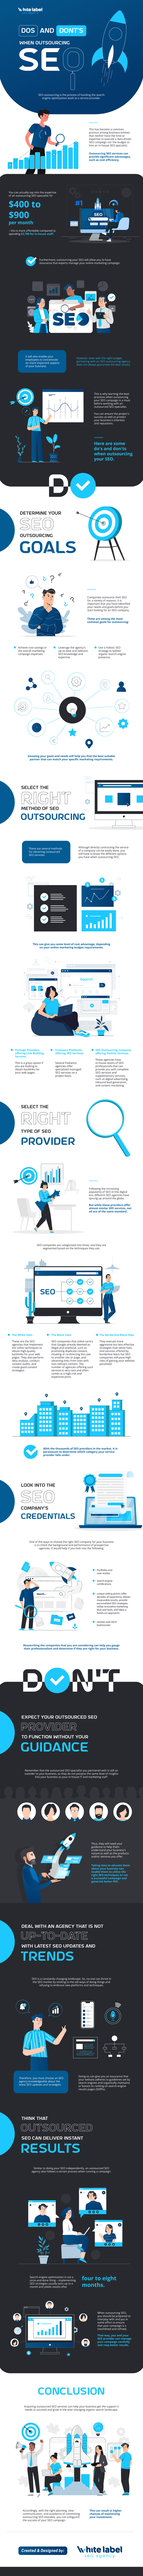 Outsourcing SEO Infographic